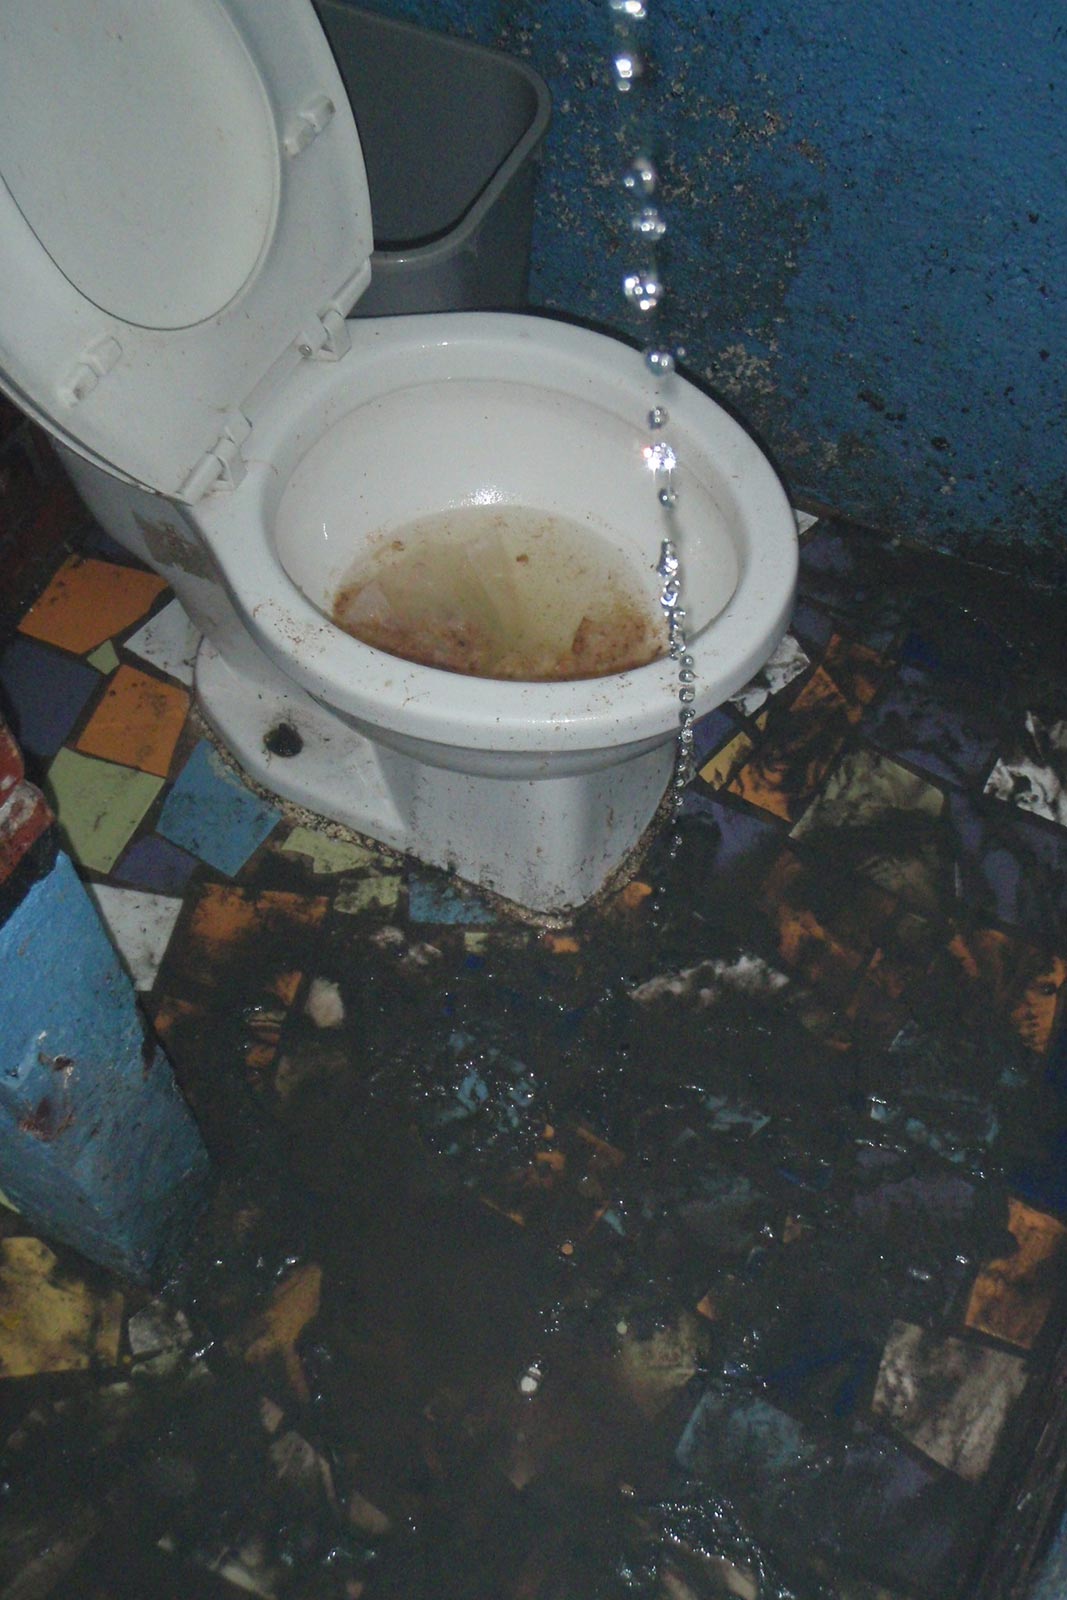 Dirty toilet in Tijuana. Accused of being a part of the IRA